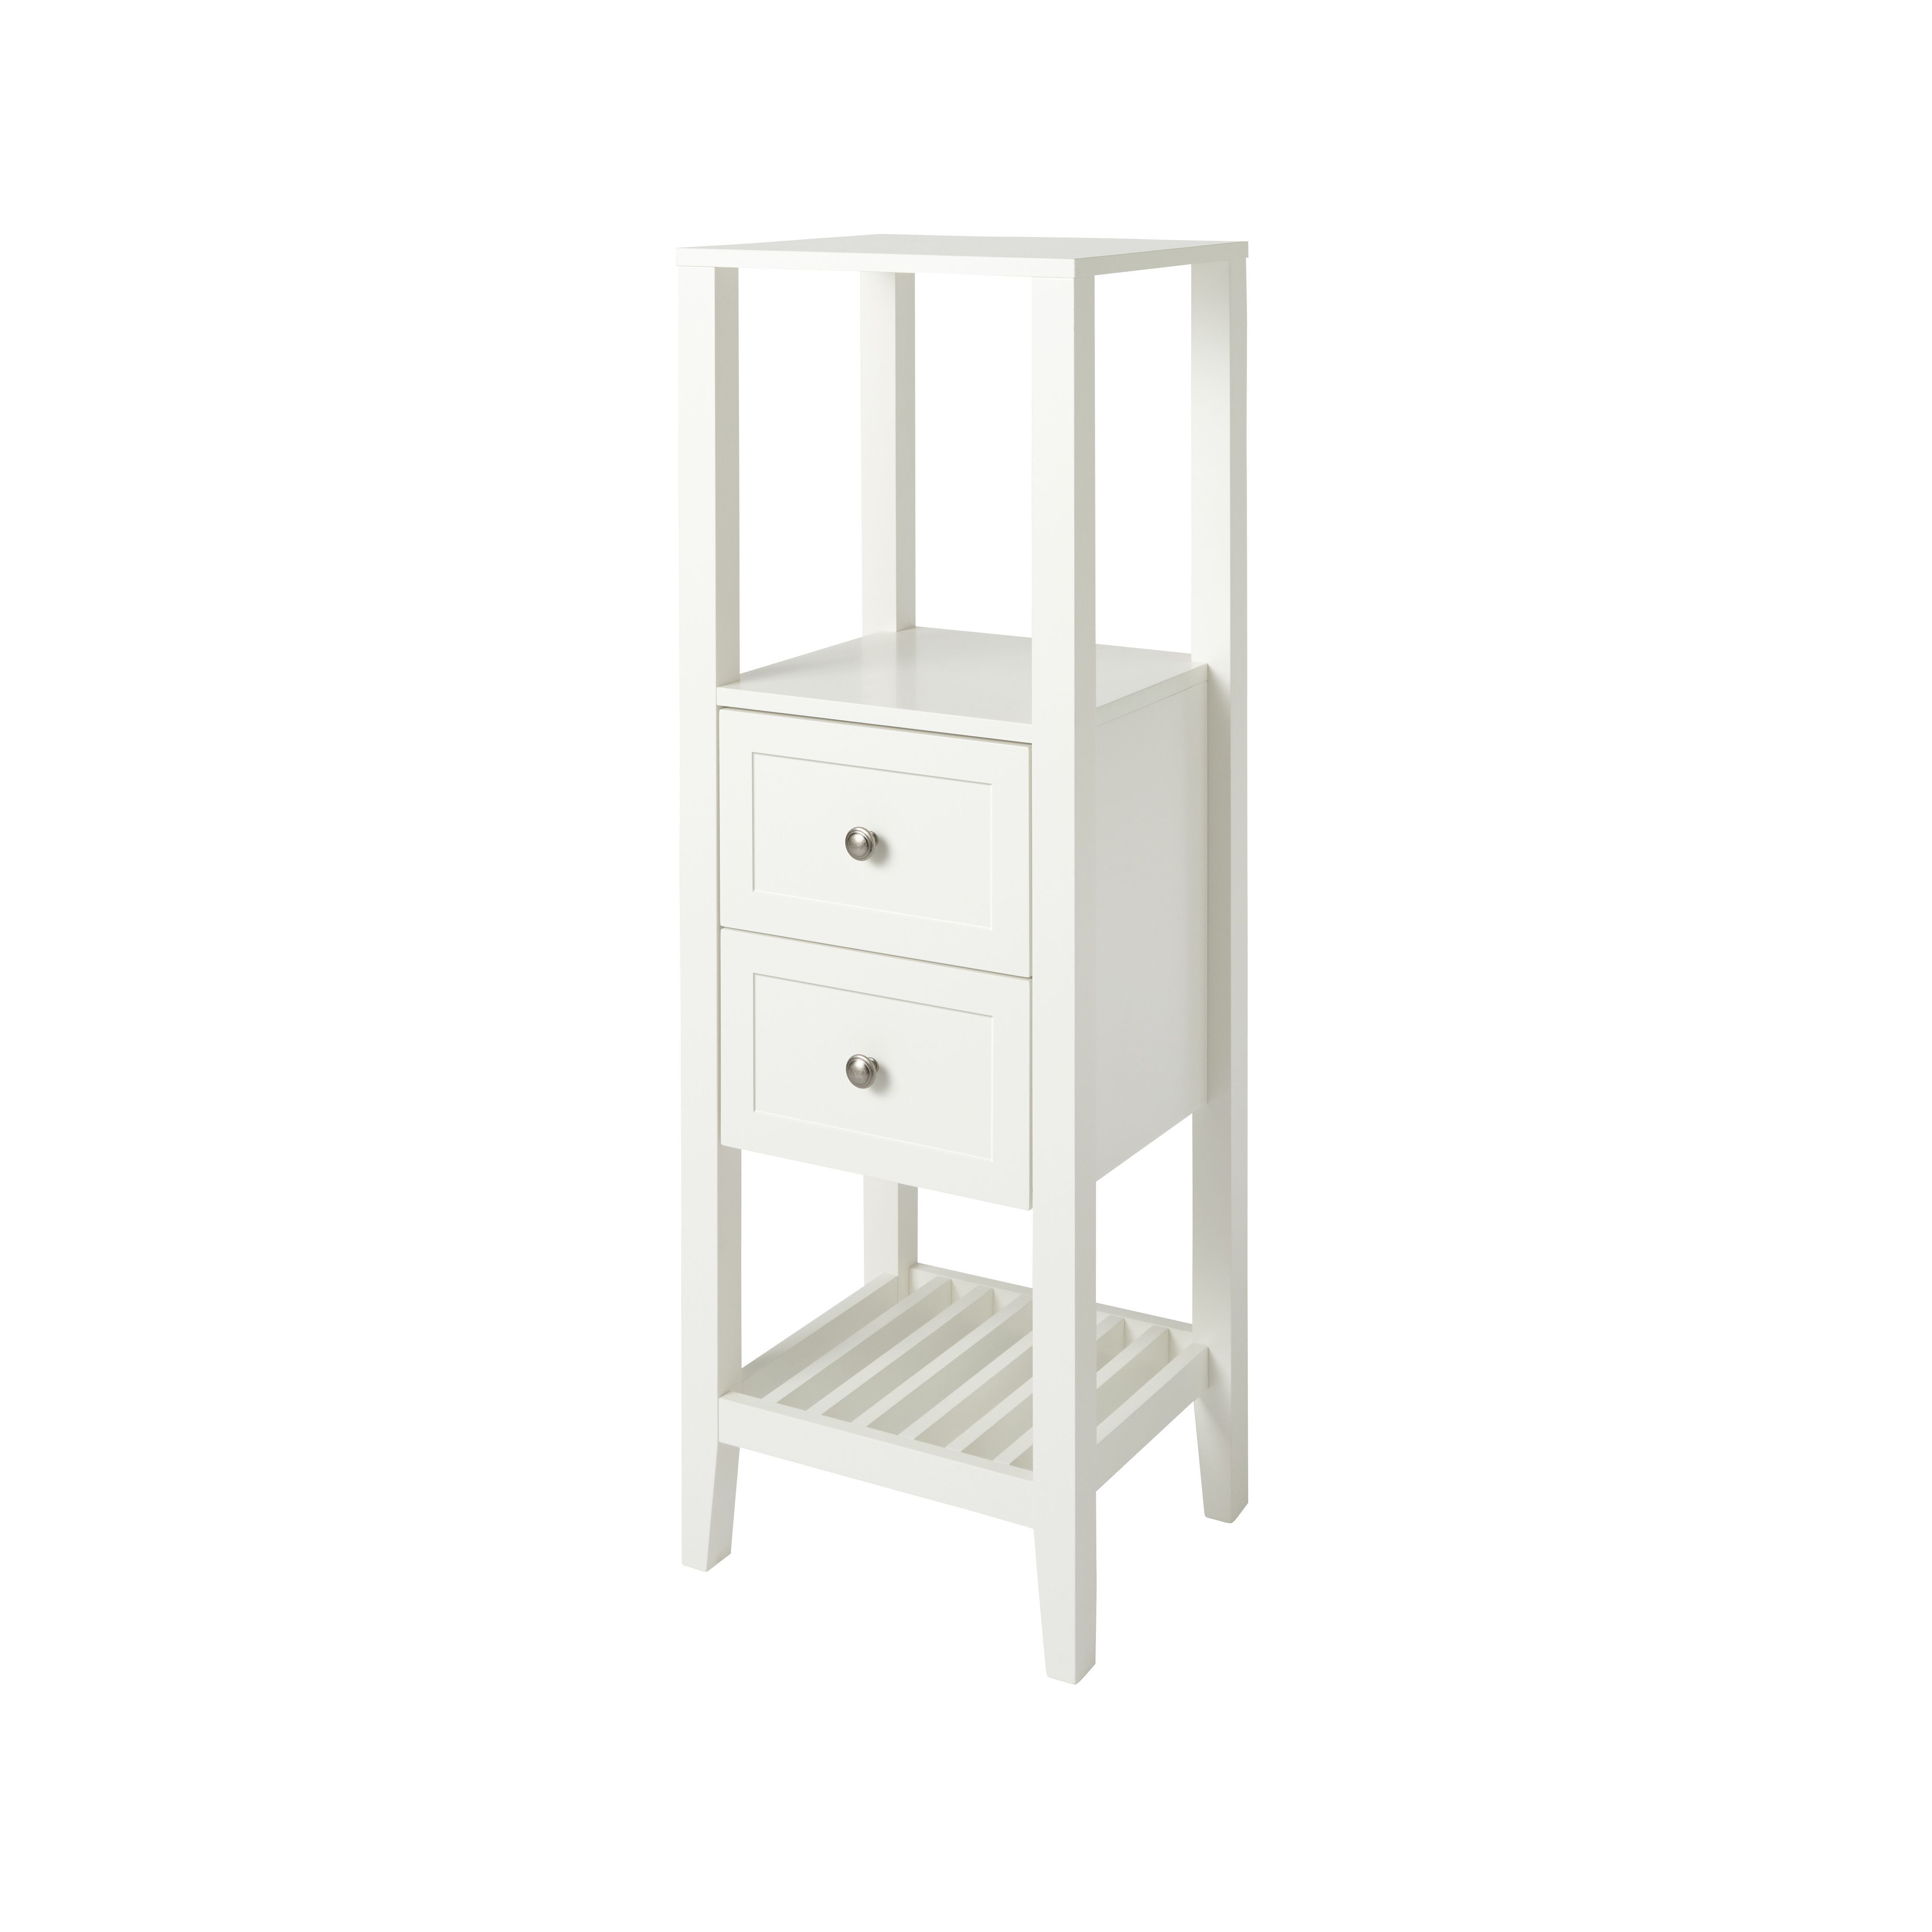 GoodHome Perma Satin White Tall Freestanding Bathroom Cabinet (W)400mm (H)1200mm